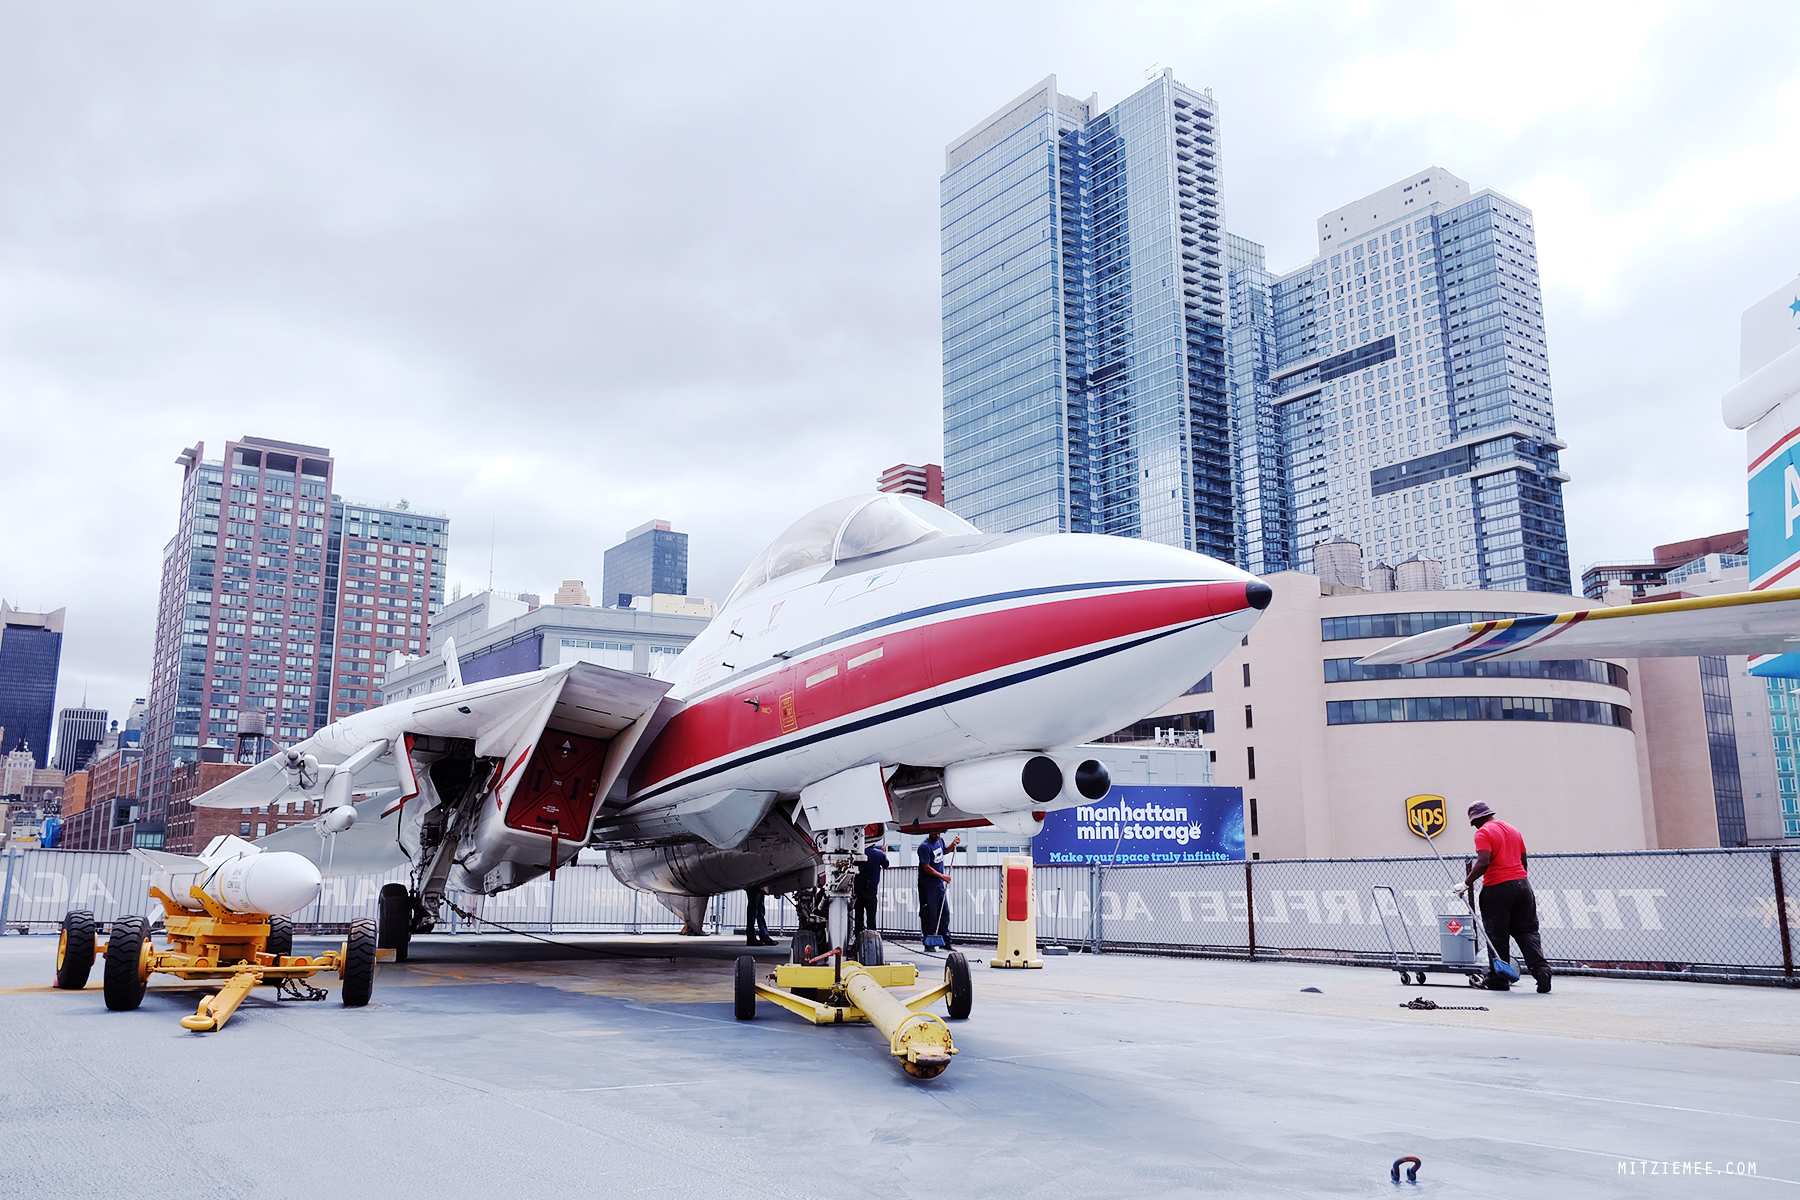 New York: The Intrepid Sea, Air & Space Museum